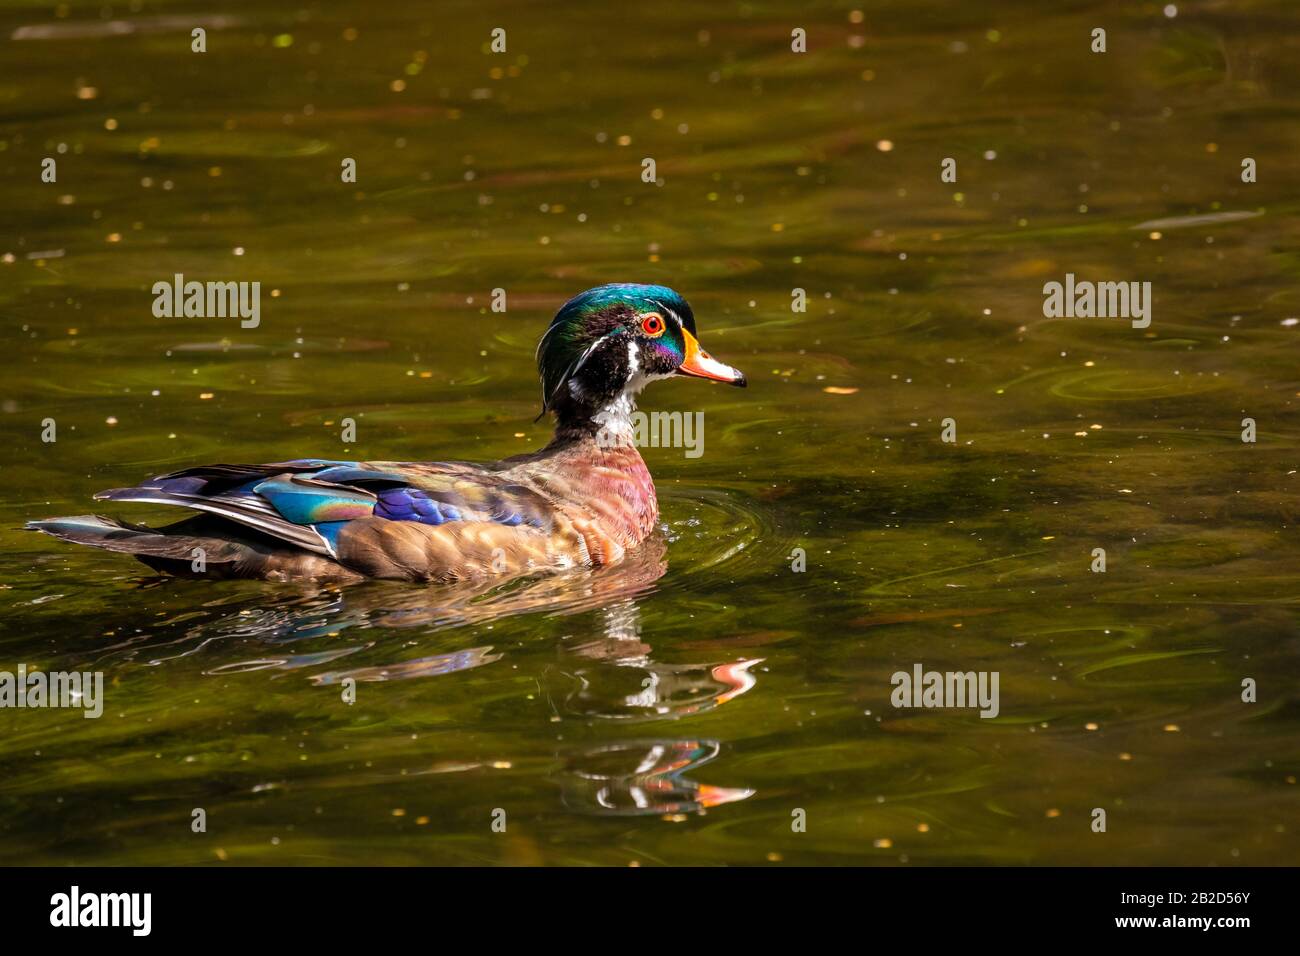 Male wood duck in water, with distinctive multicolored iridescent plumage and red eyes Stock Photo